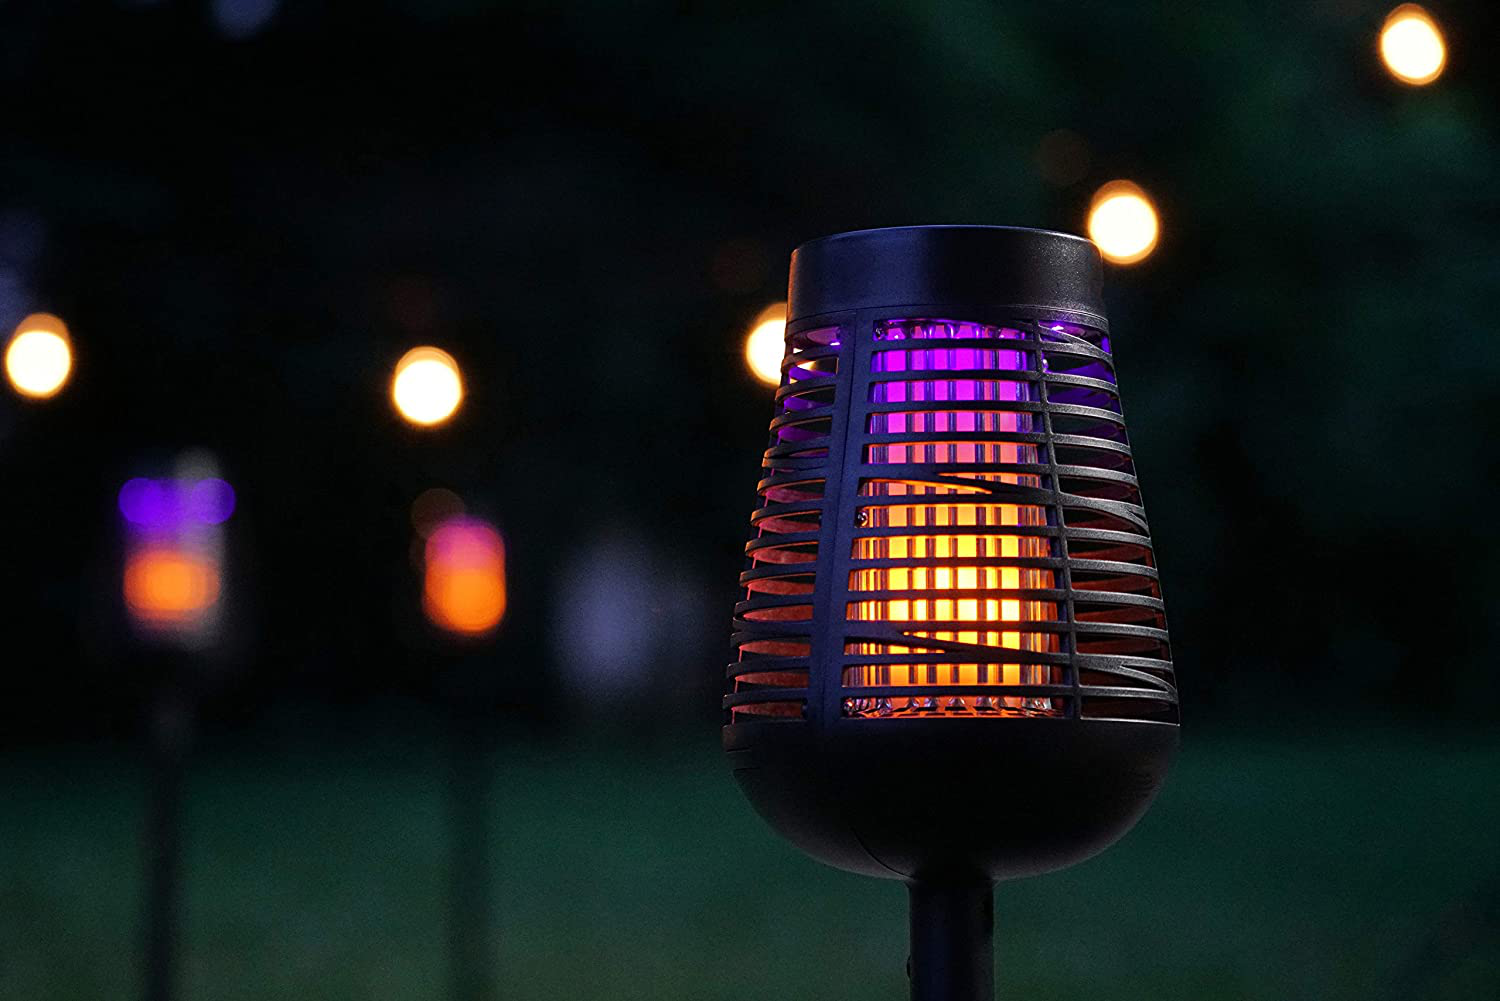 PIC Portable Solar Insect Killer Torch (FLPT), Bug Zapper and Flame Accent Light, Kills Bugs on Contact - Twin Pack